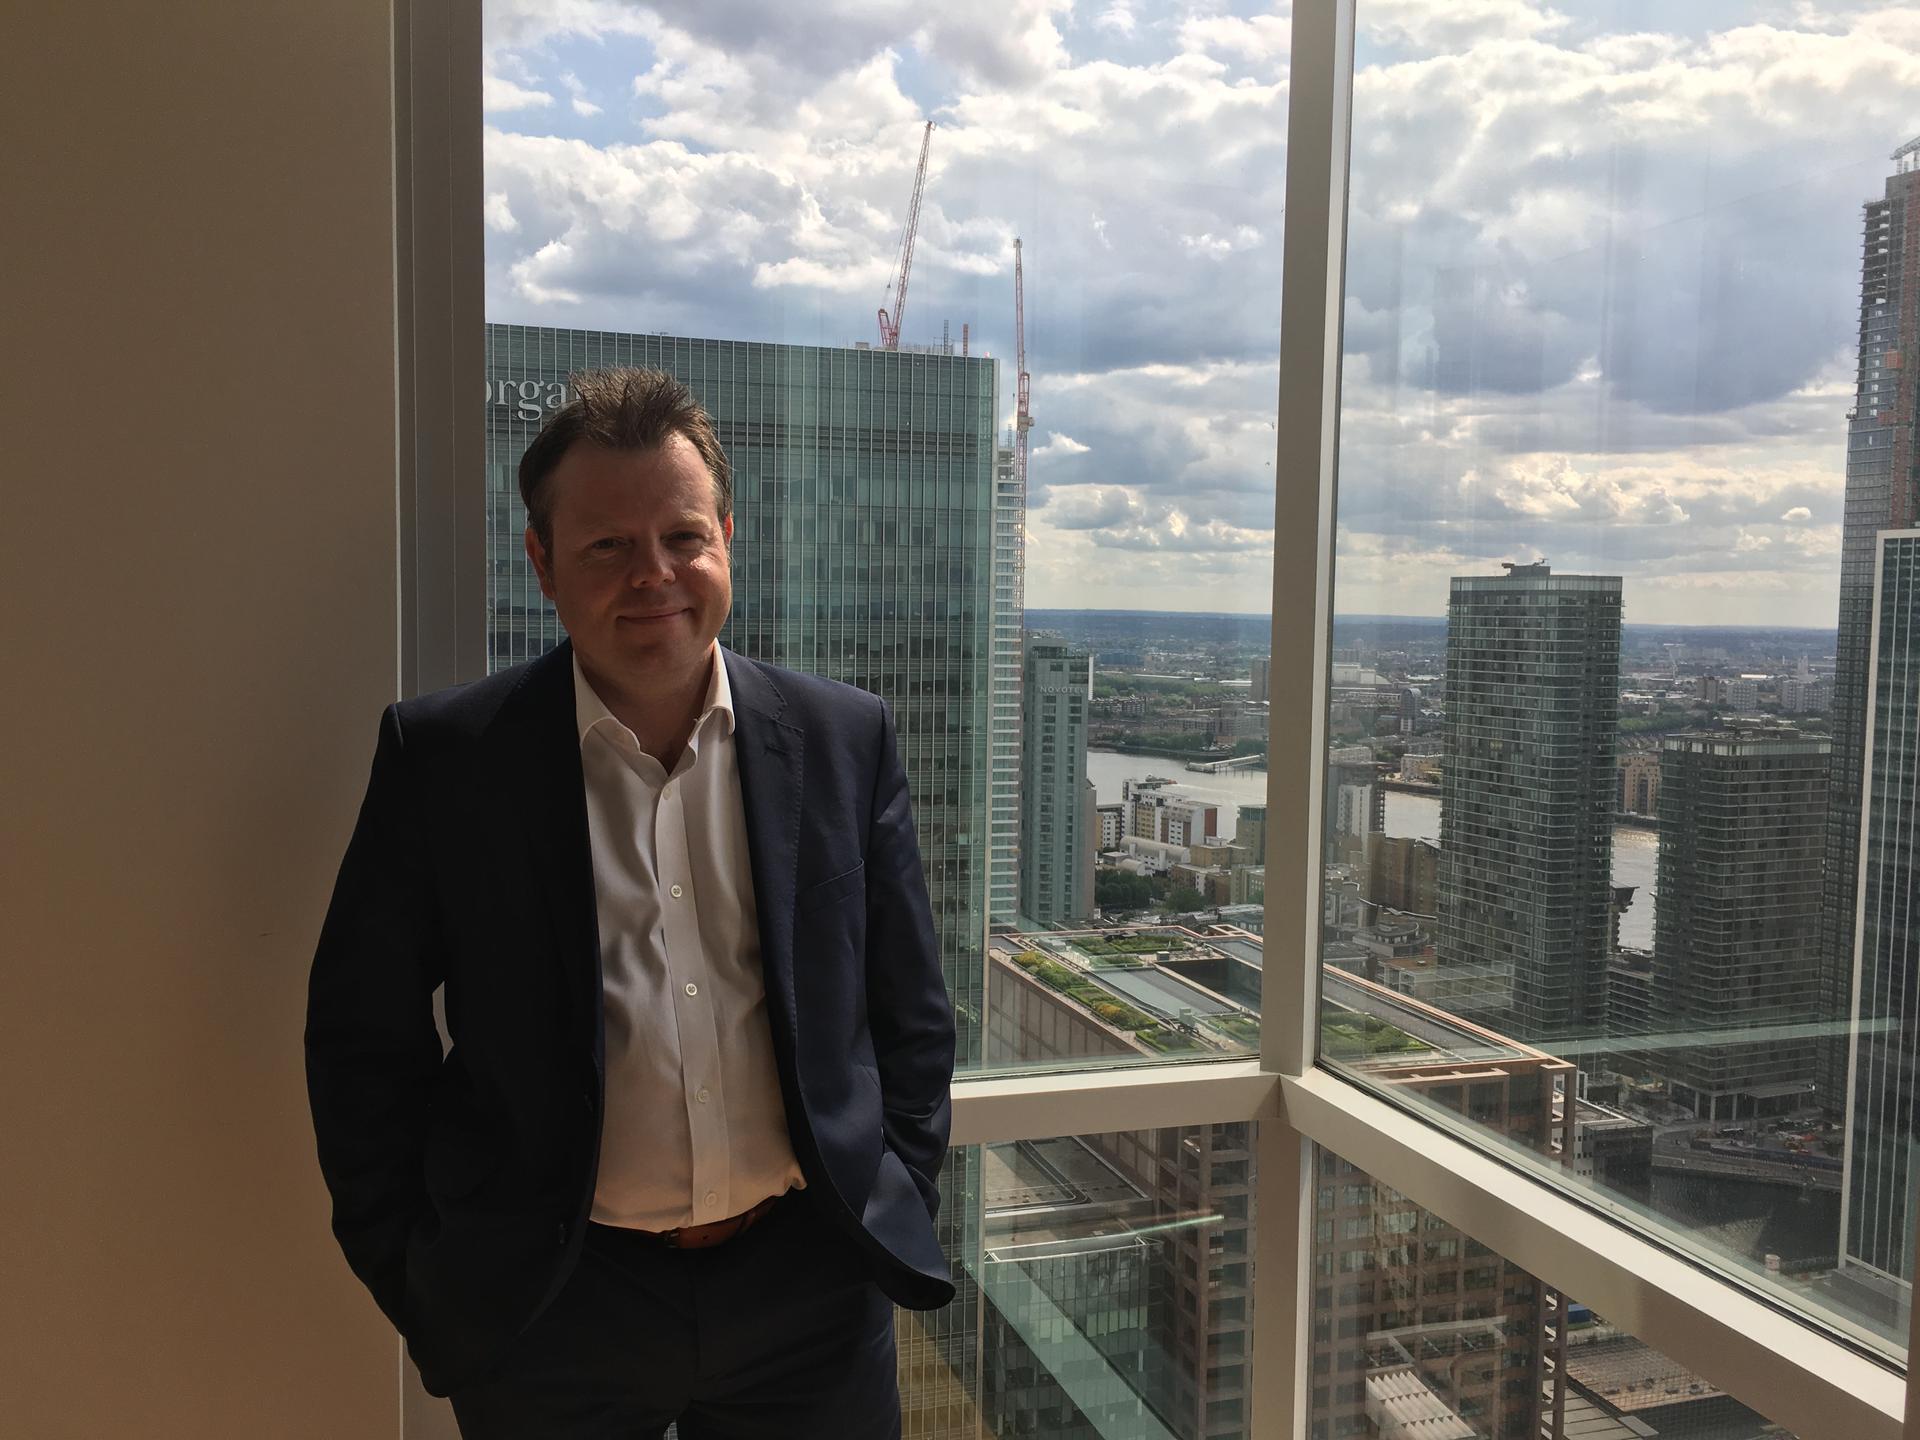 Martin Gettings, the head of sustainability at Canary Wharf Group, is working to reduce plastic waste across this multi-billion dollar commercial estate, which was just labeled the first plastic-free commercial district in the UK.